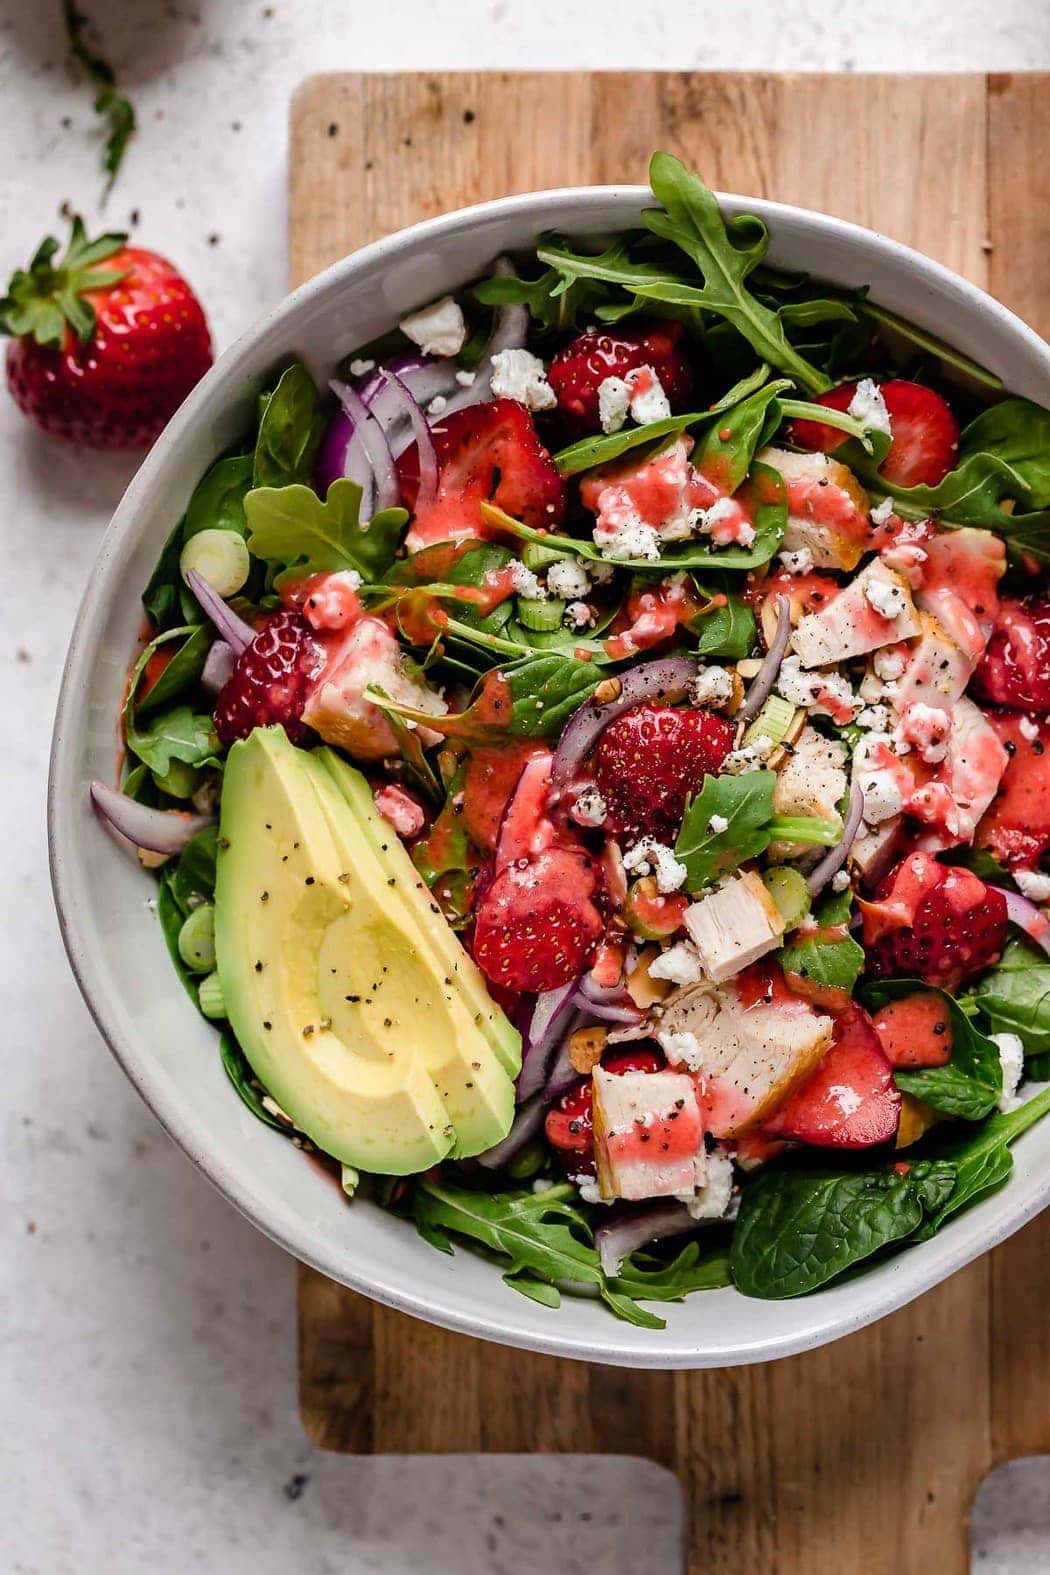 White stone bowl filled with strawberry spinach salad served with chicken and avocado slices.